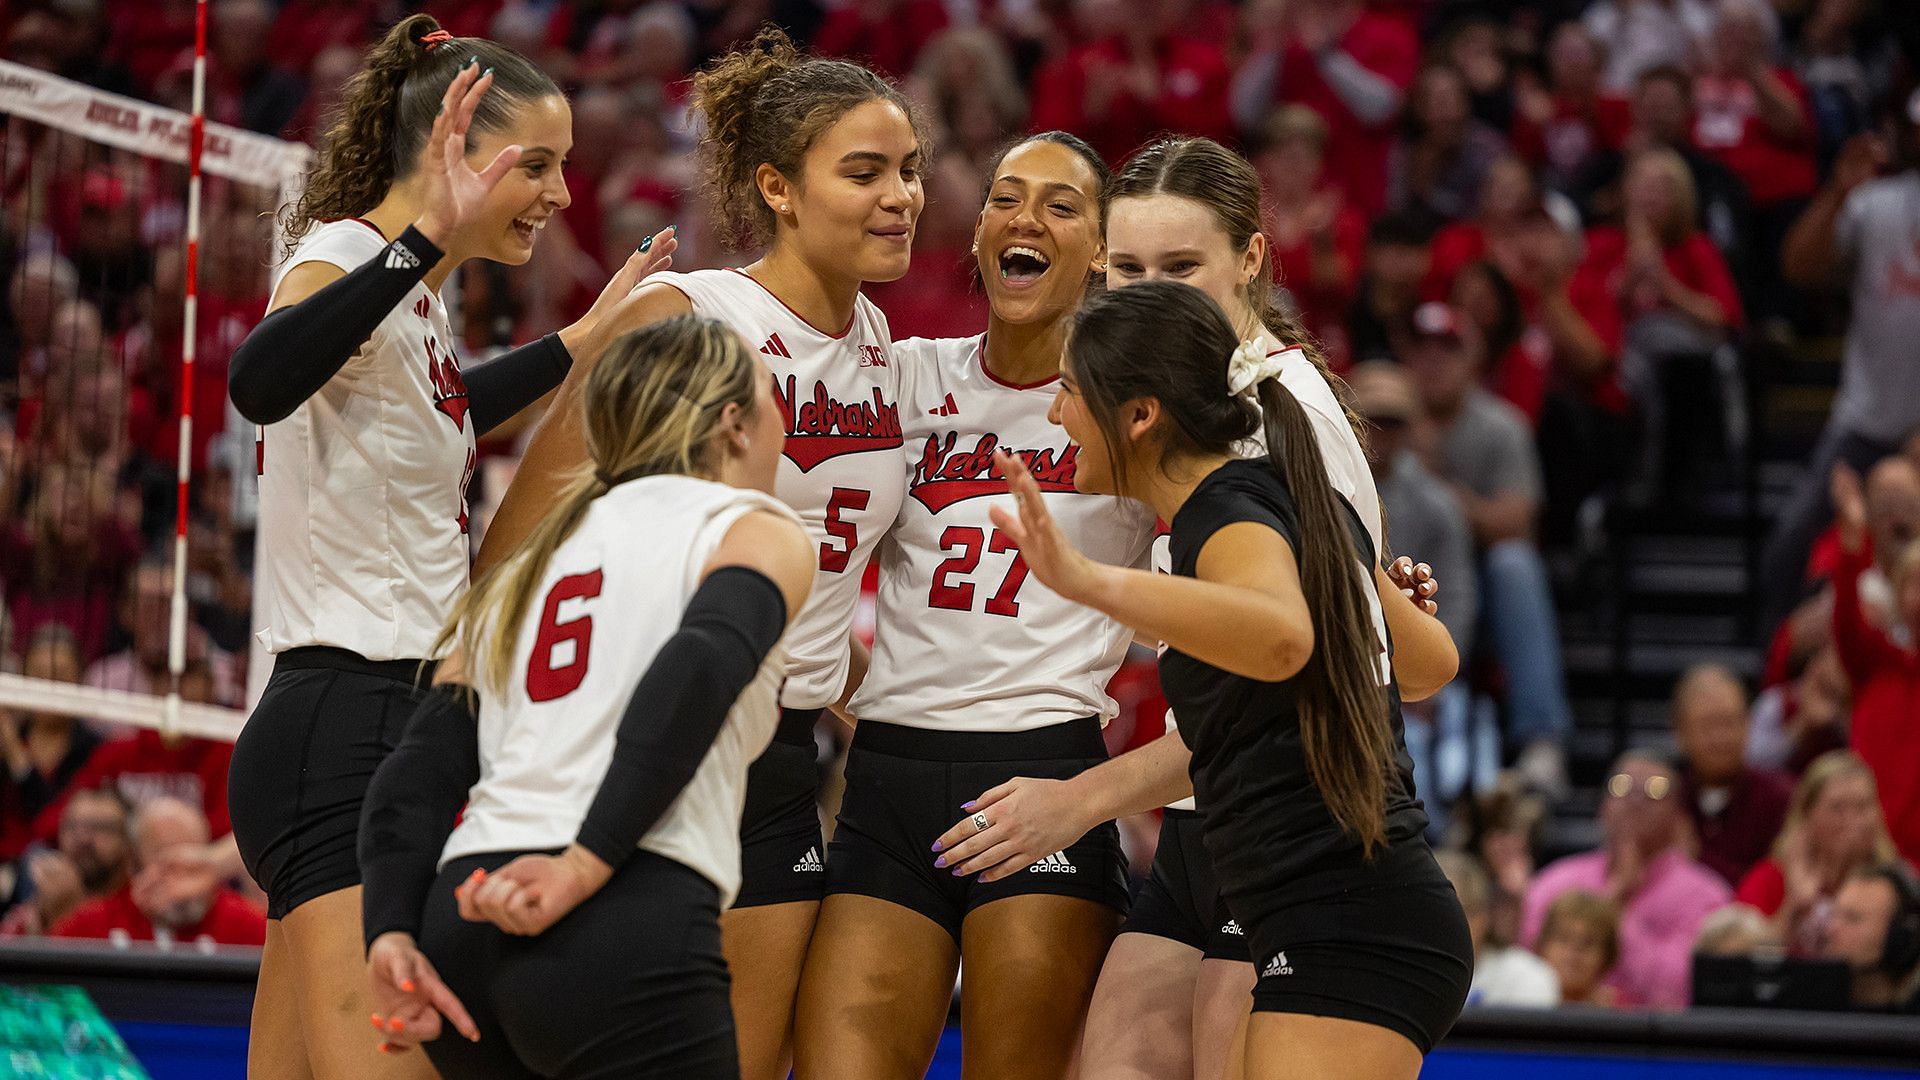 The Nebraska Cornhuskers entered the finals of the NCAA Volleyball Championships 